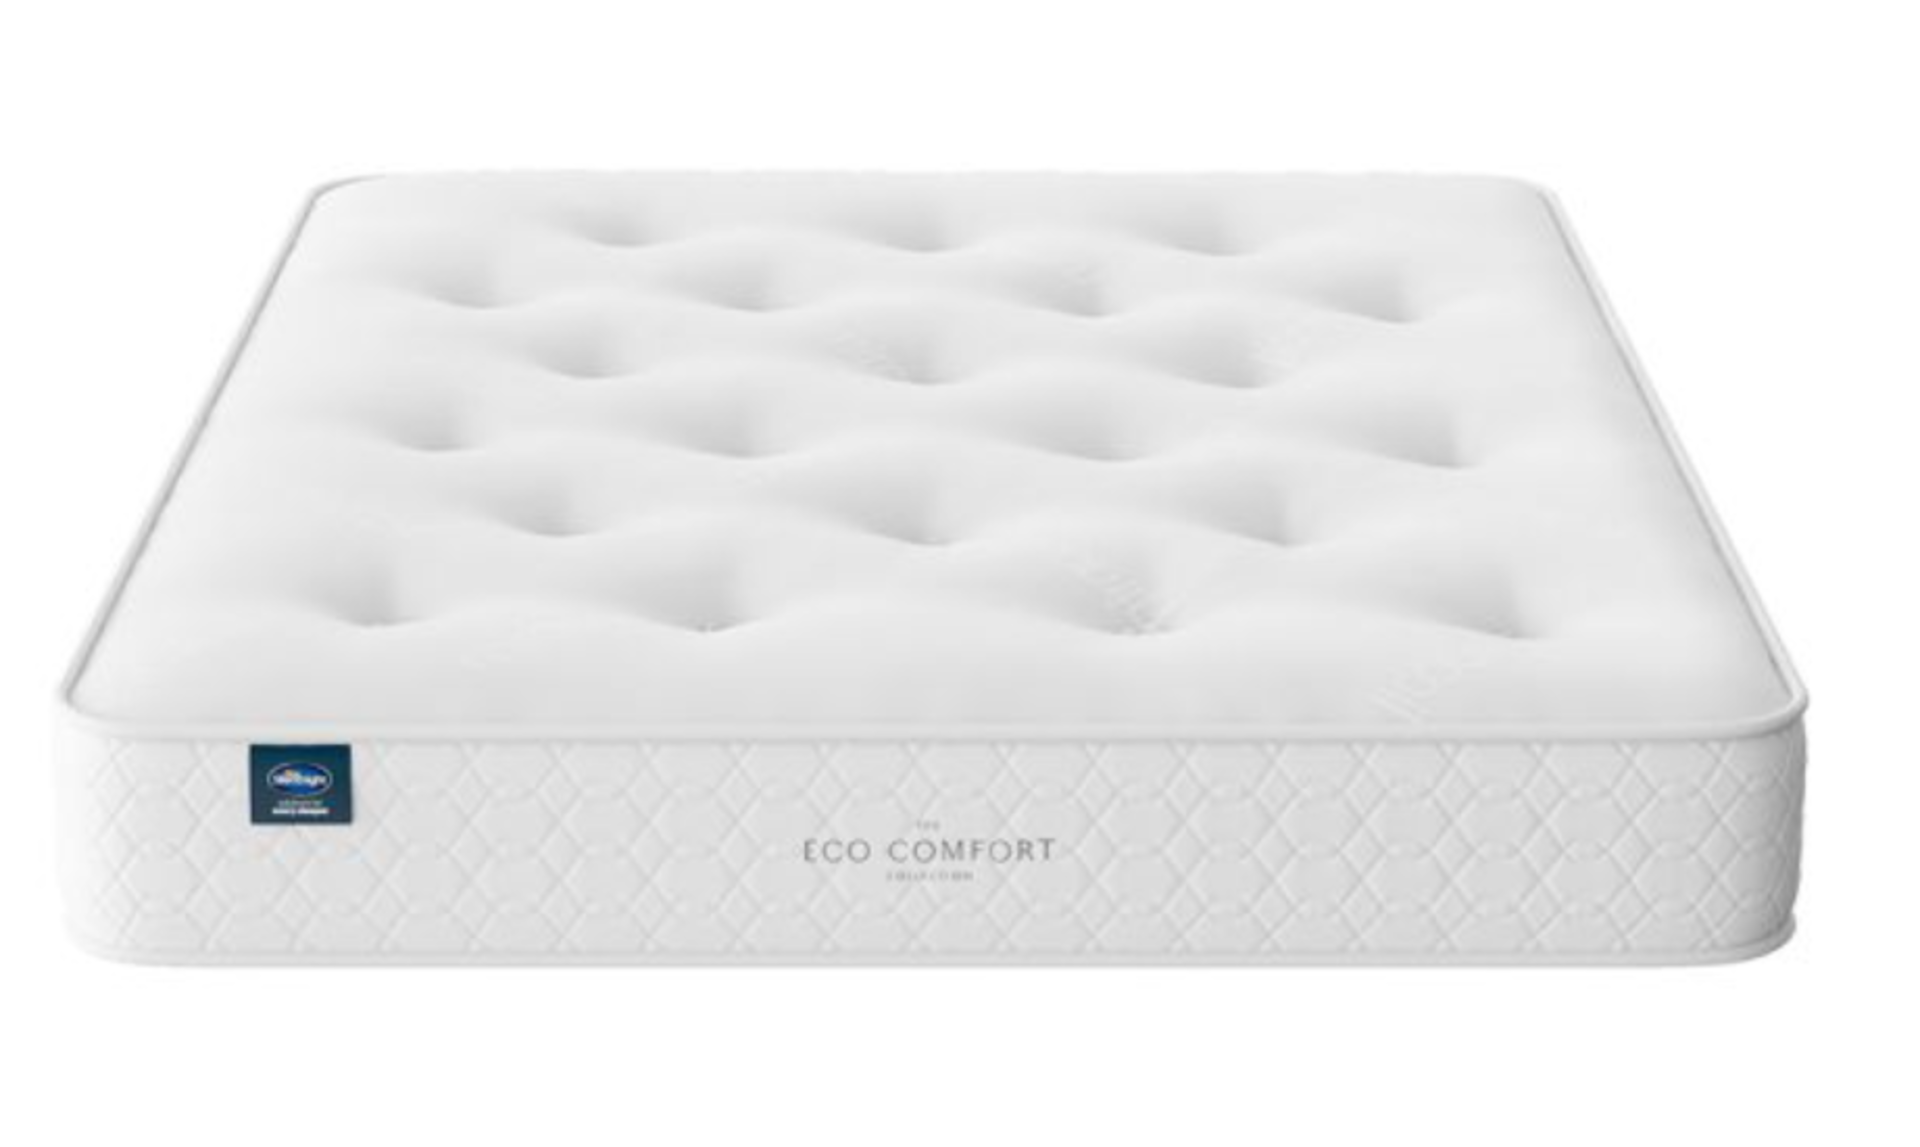 Silentnight Eco Comfort Miracoil Ortho Mattress. Small Double. Eco Comfort Fibres create a